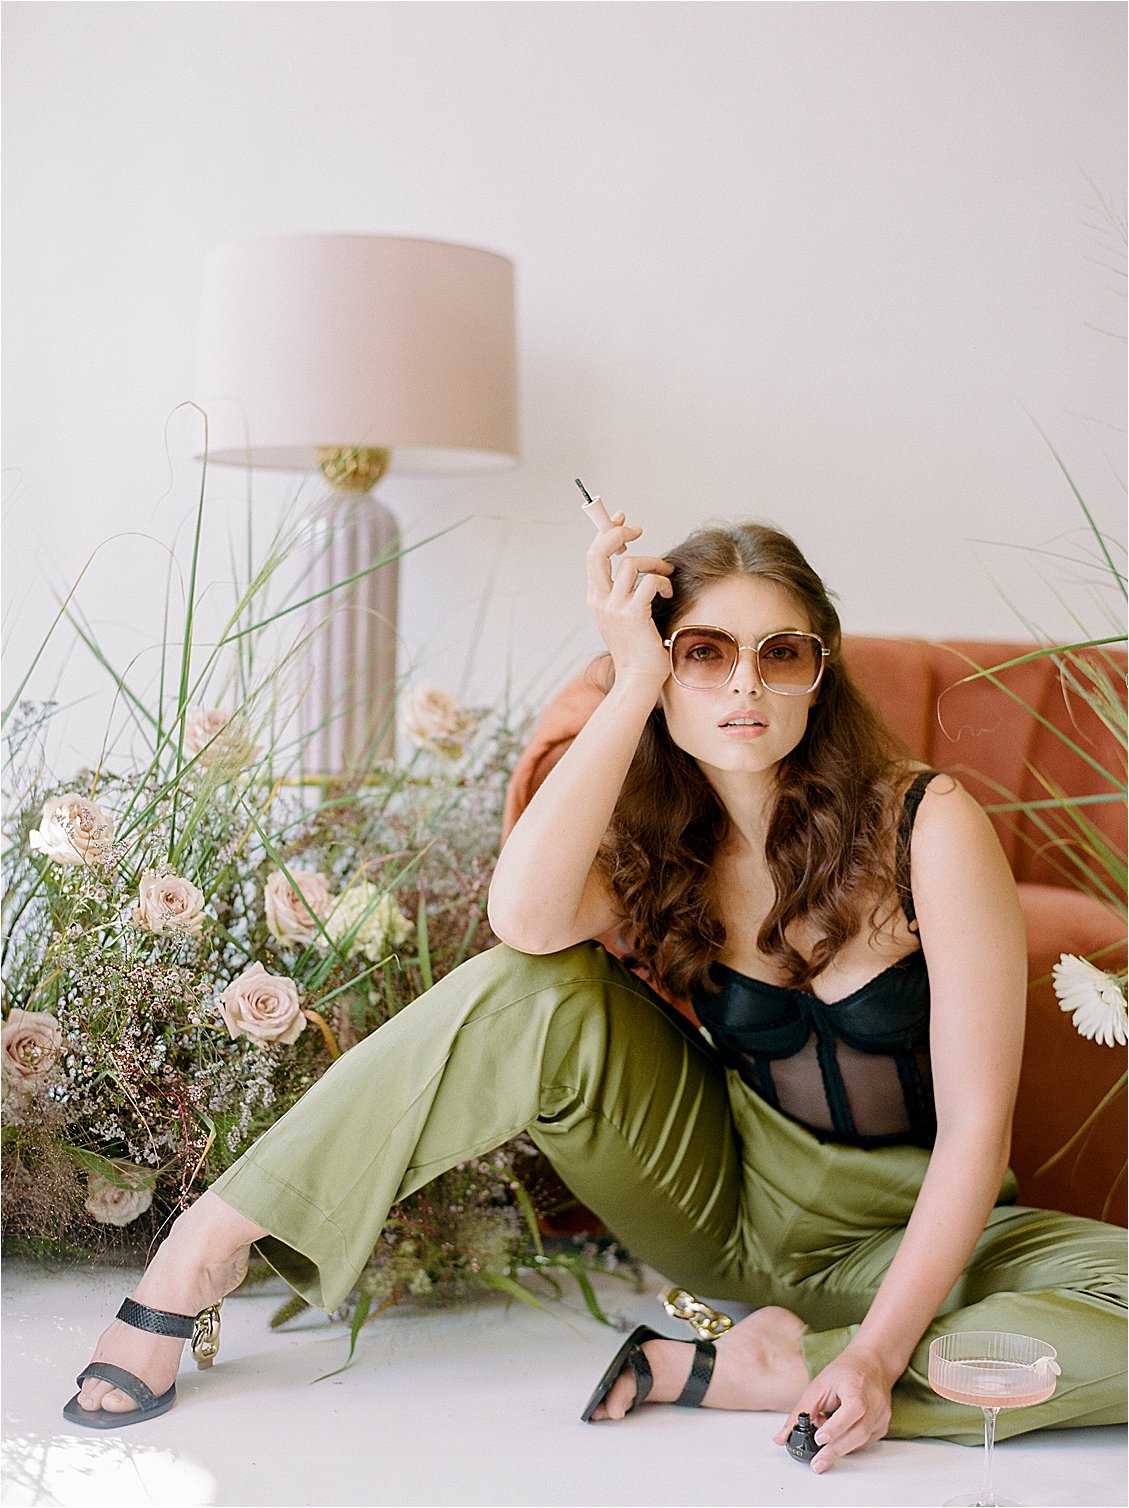 70s inspired fashion editorial with film photographer Renee Hollingshead with Abby Garden Floral, Gucci, Tom Ford, Fendi, Cult Gaia, Chanel, Chloe, and more